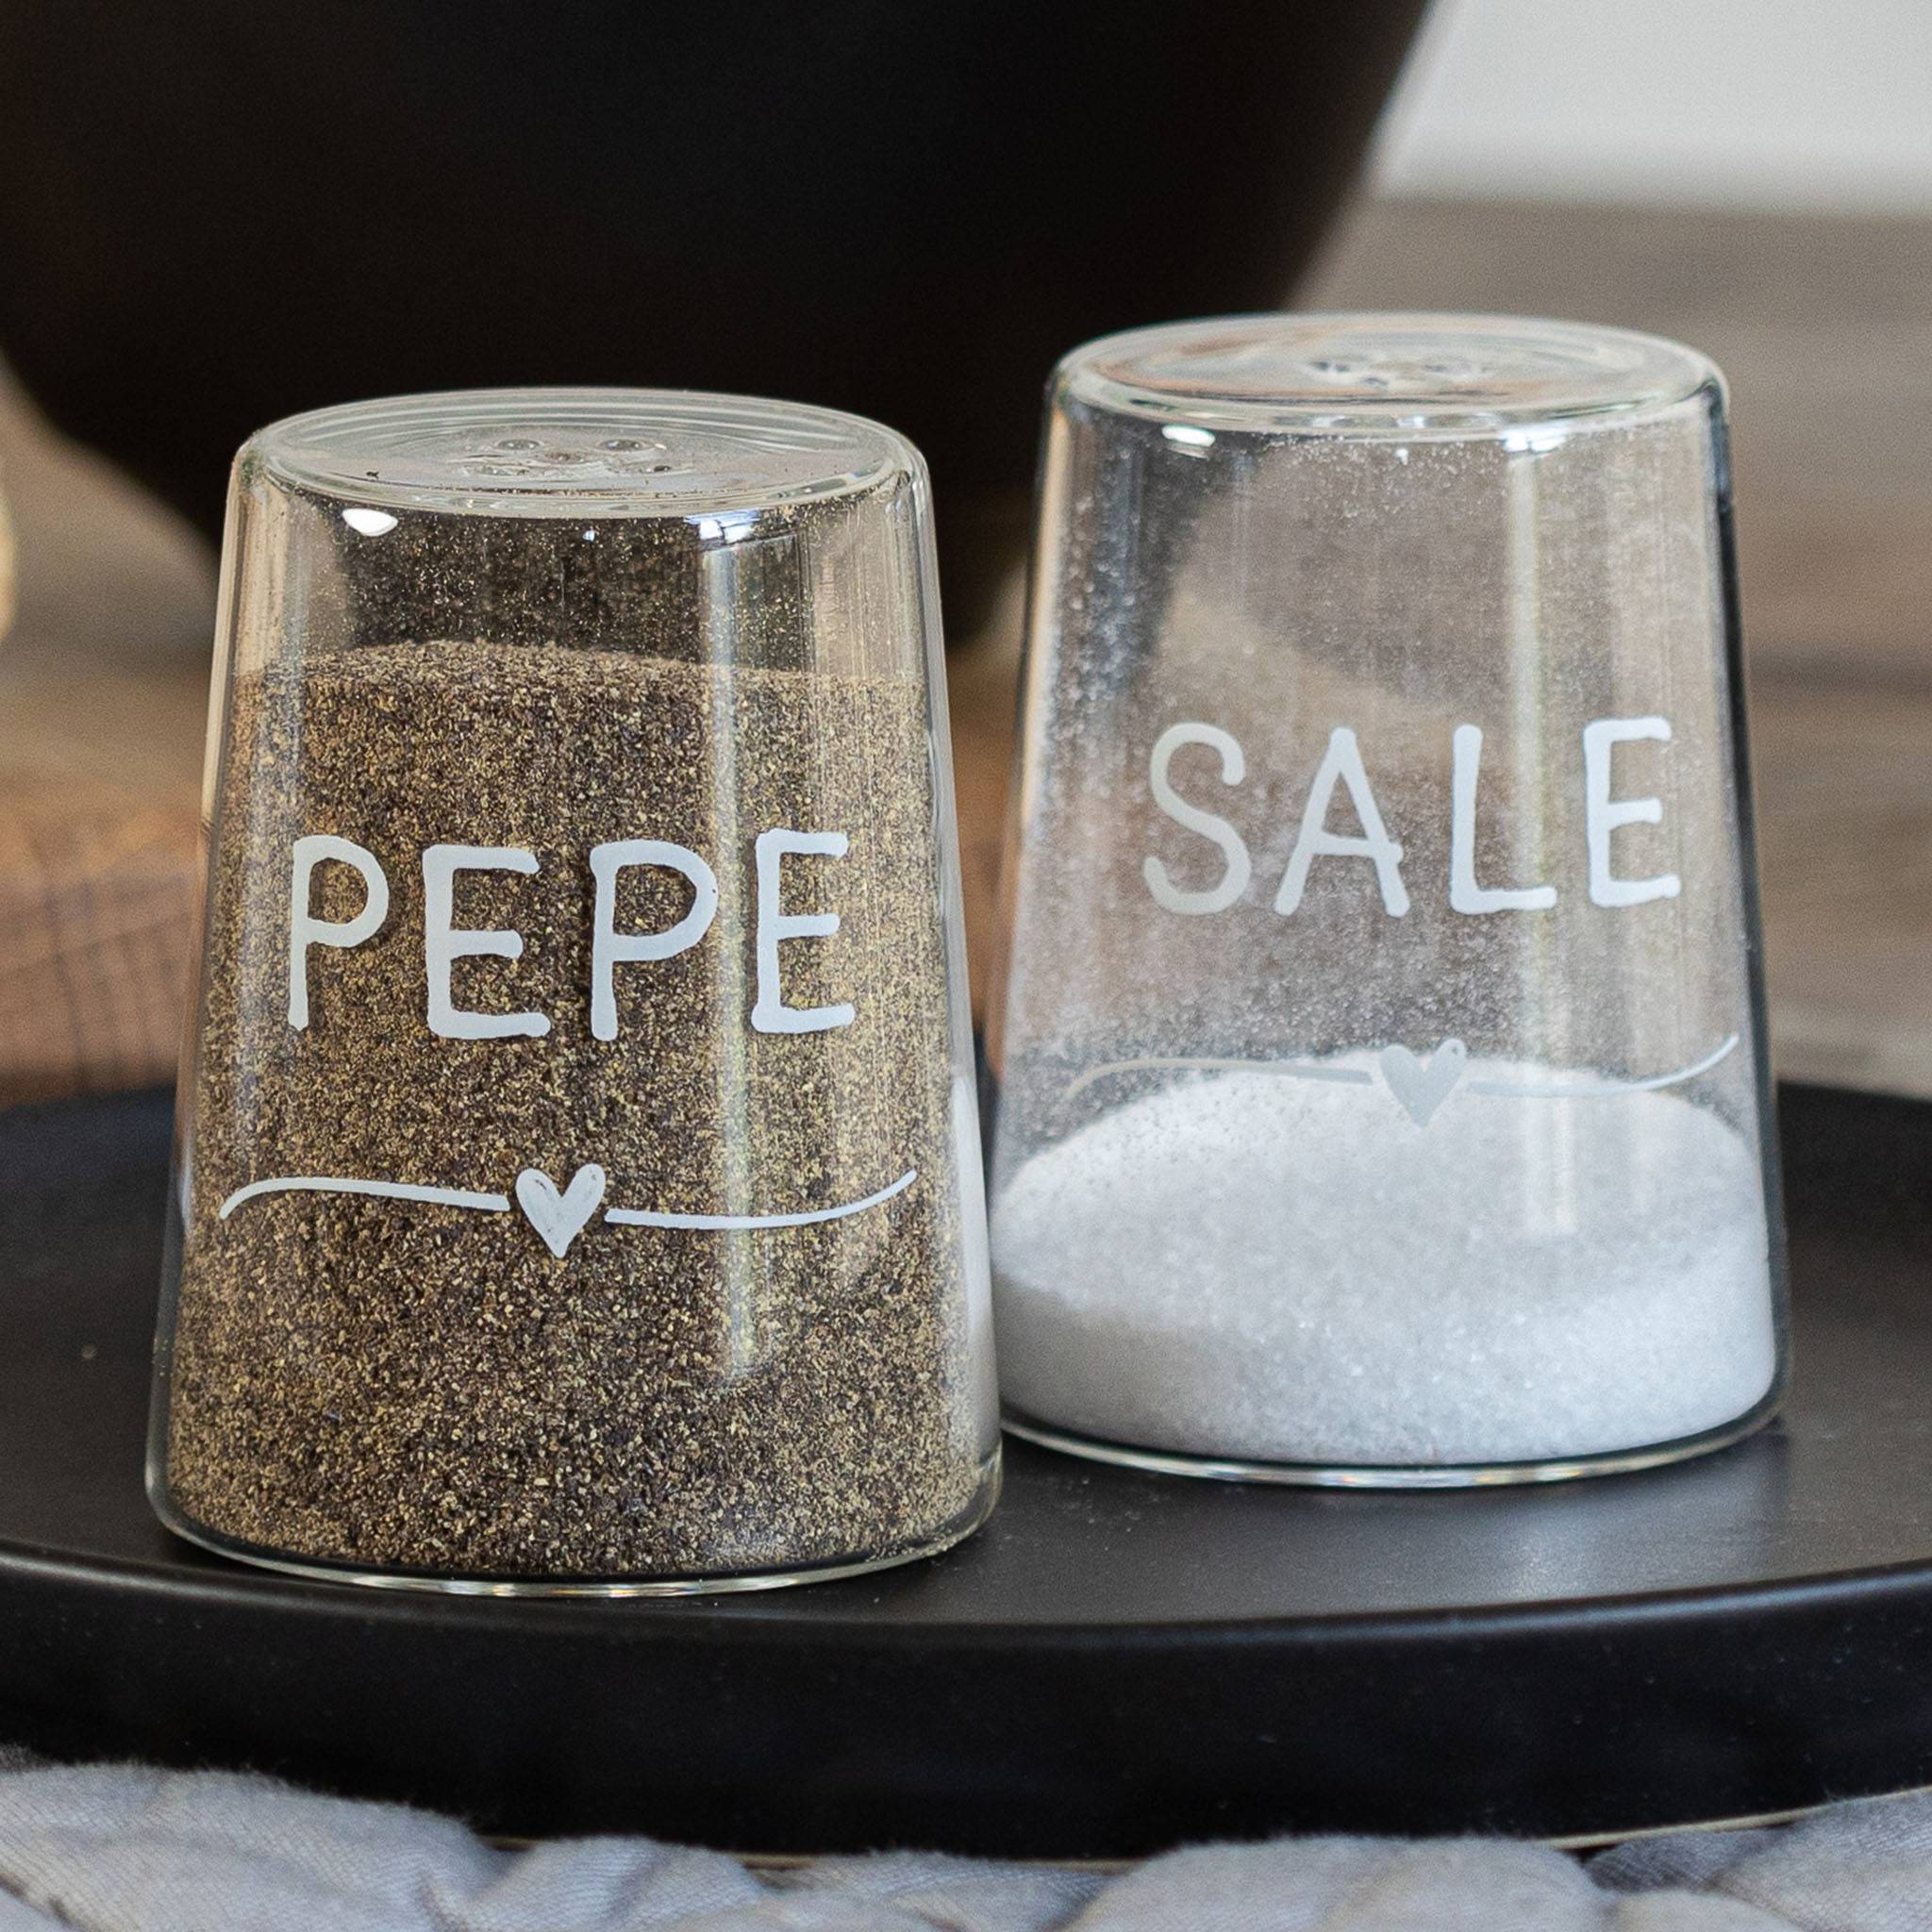 "Sale" and "Pepe" with Heart Salt & Pepper Set